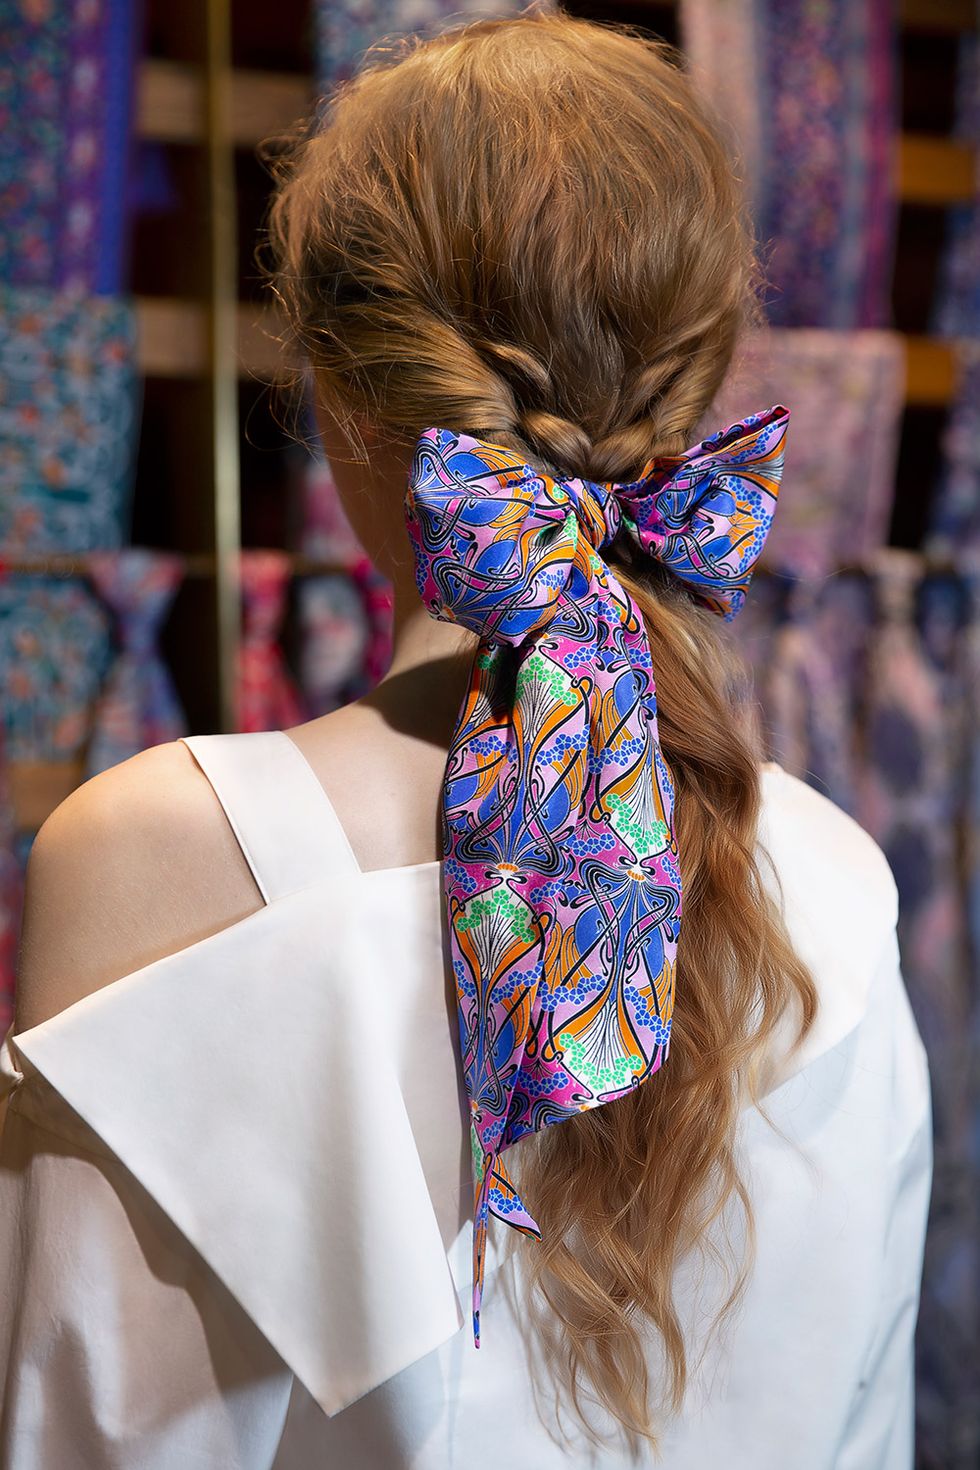 Liberty Taylor Taylor scarf hair styling - Liberty print hair accessories  service